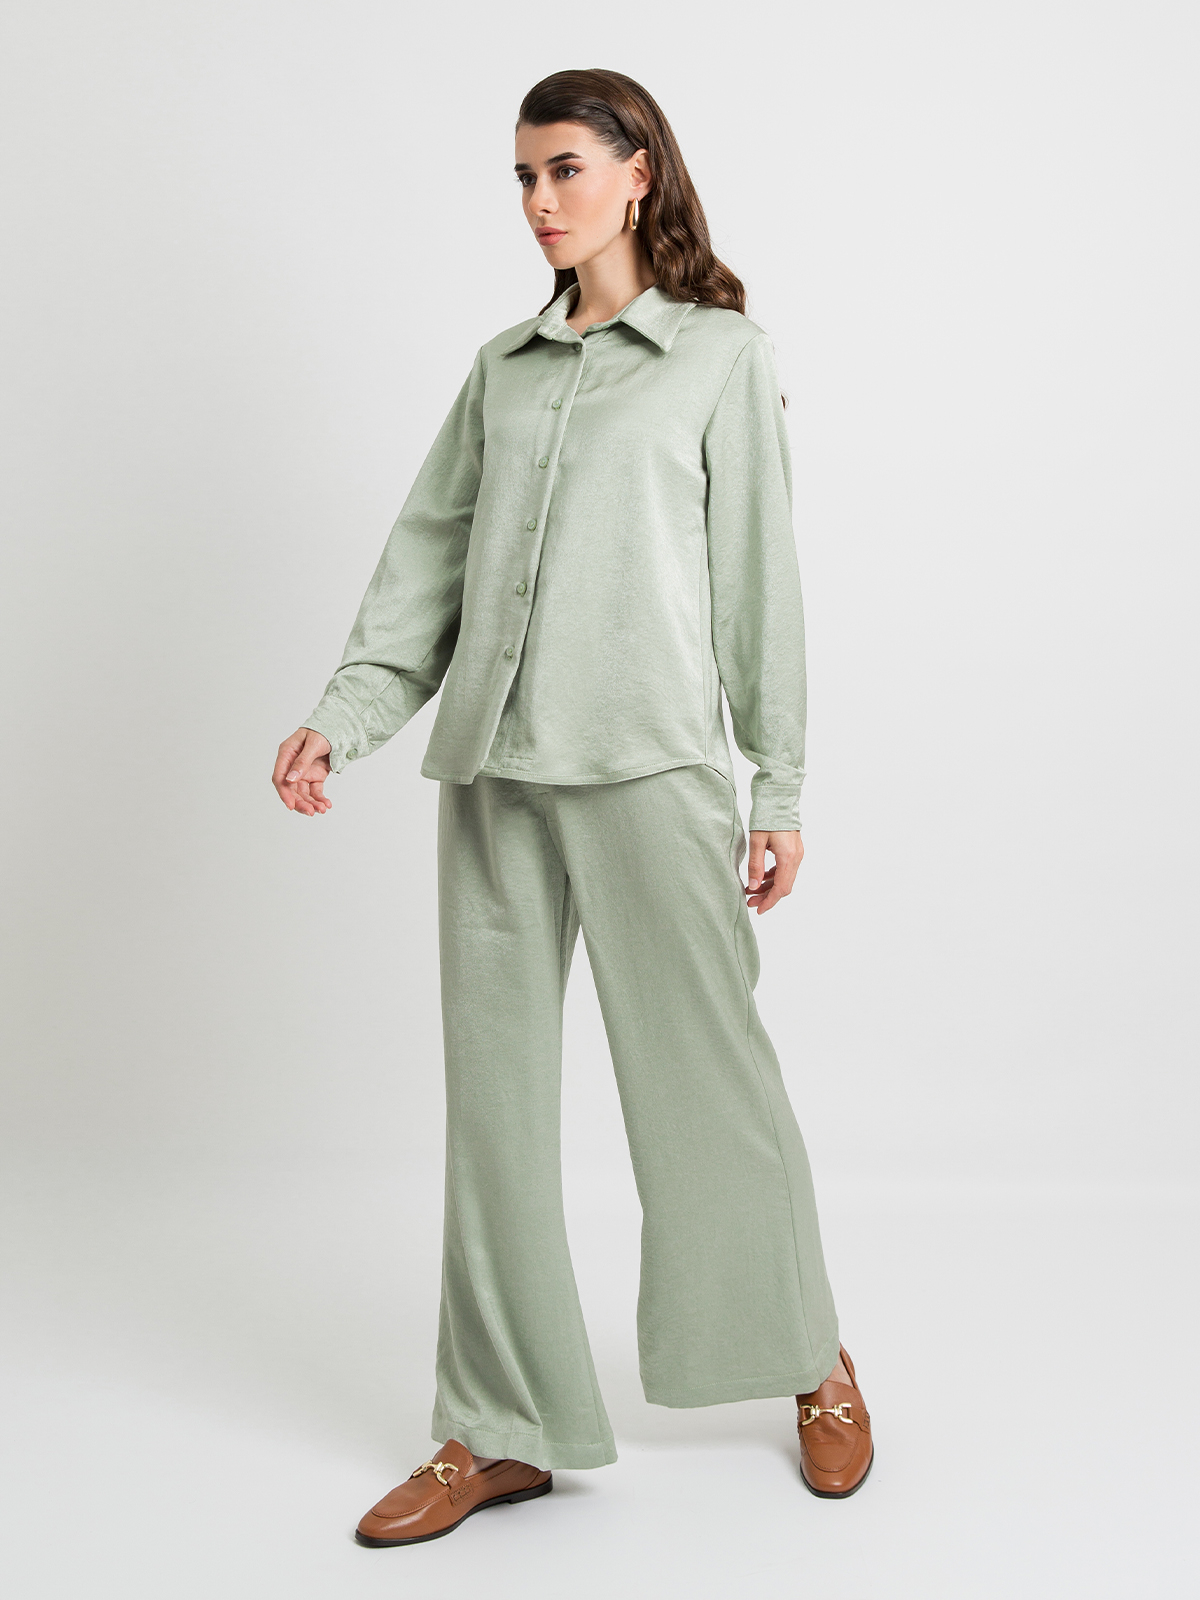 Pistachio - Flared Pants With Reguler-fit Shirt Set in Soft & Silky-feel Fabric